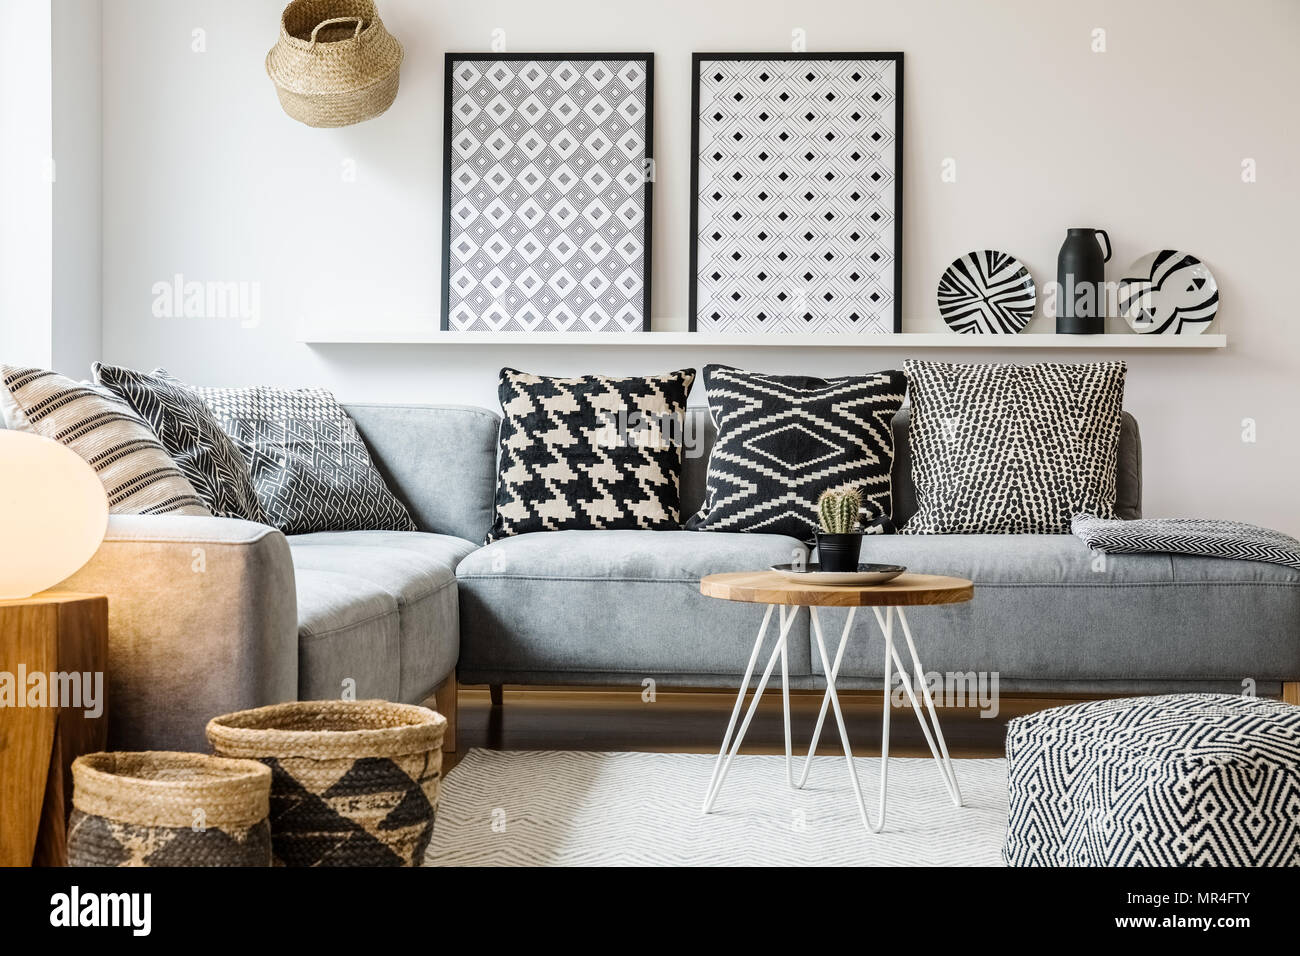 Patterned Pillows On Grey Corner Sofa In Apartment Interior